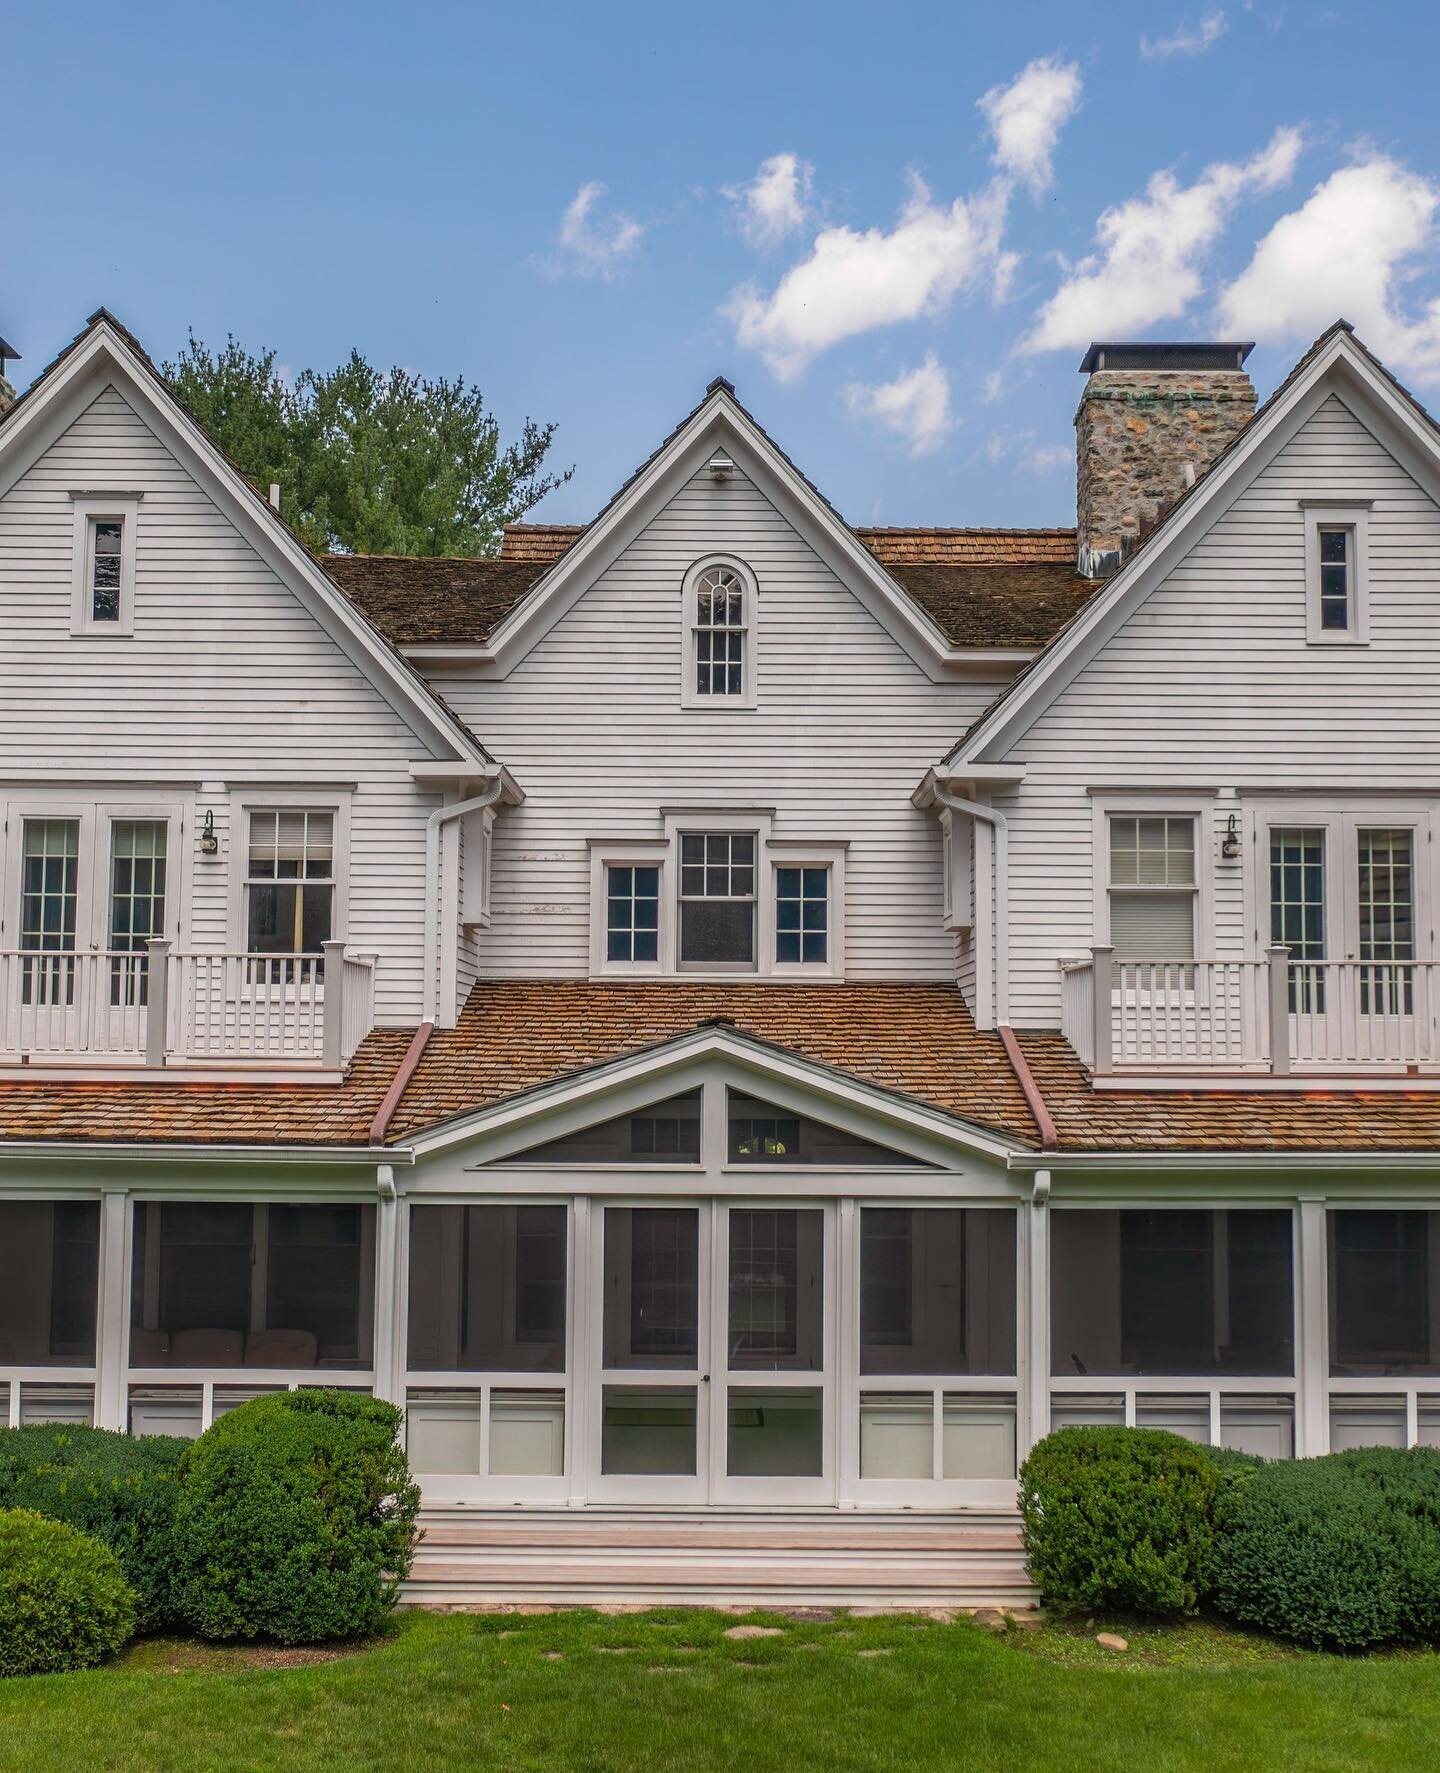 On the market ⭐️⁠
⁠
🏡 6 Wedges Field⁠
6 Bed &bull; 7 | 1 Baths⁠
⁠
Designed by Jack Franzen and custom-built by Michael Greenberg, this one-of-a-kind dream home sits on 5 acres overlooking the Saugatuck River 🌊⁠
⁠
In true luxury style, you&rsquo;ll 